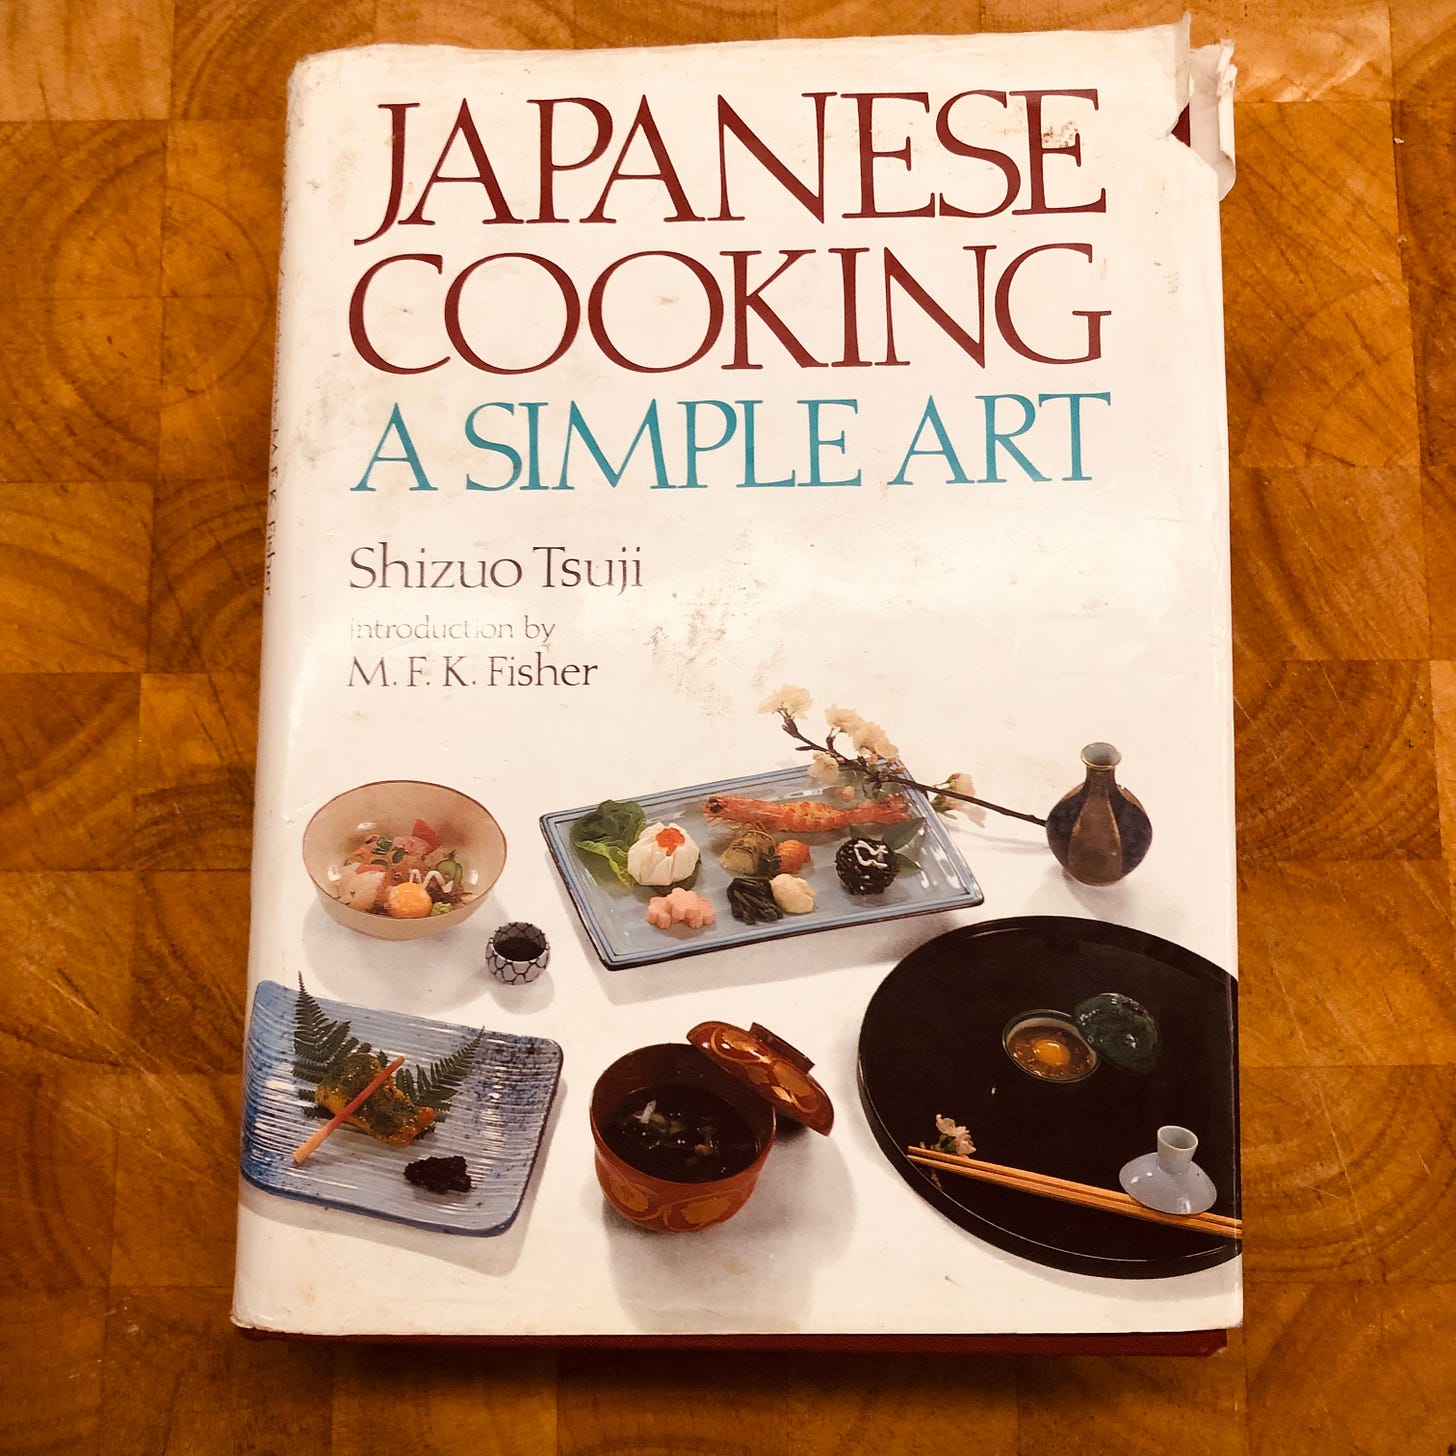 A very worn copy of Japanese Cooking: A Simple Art